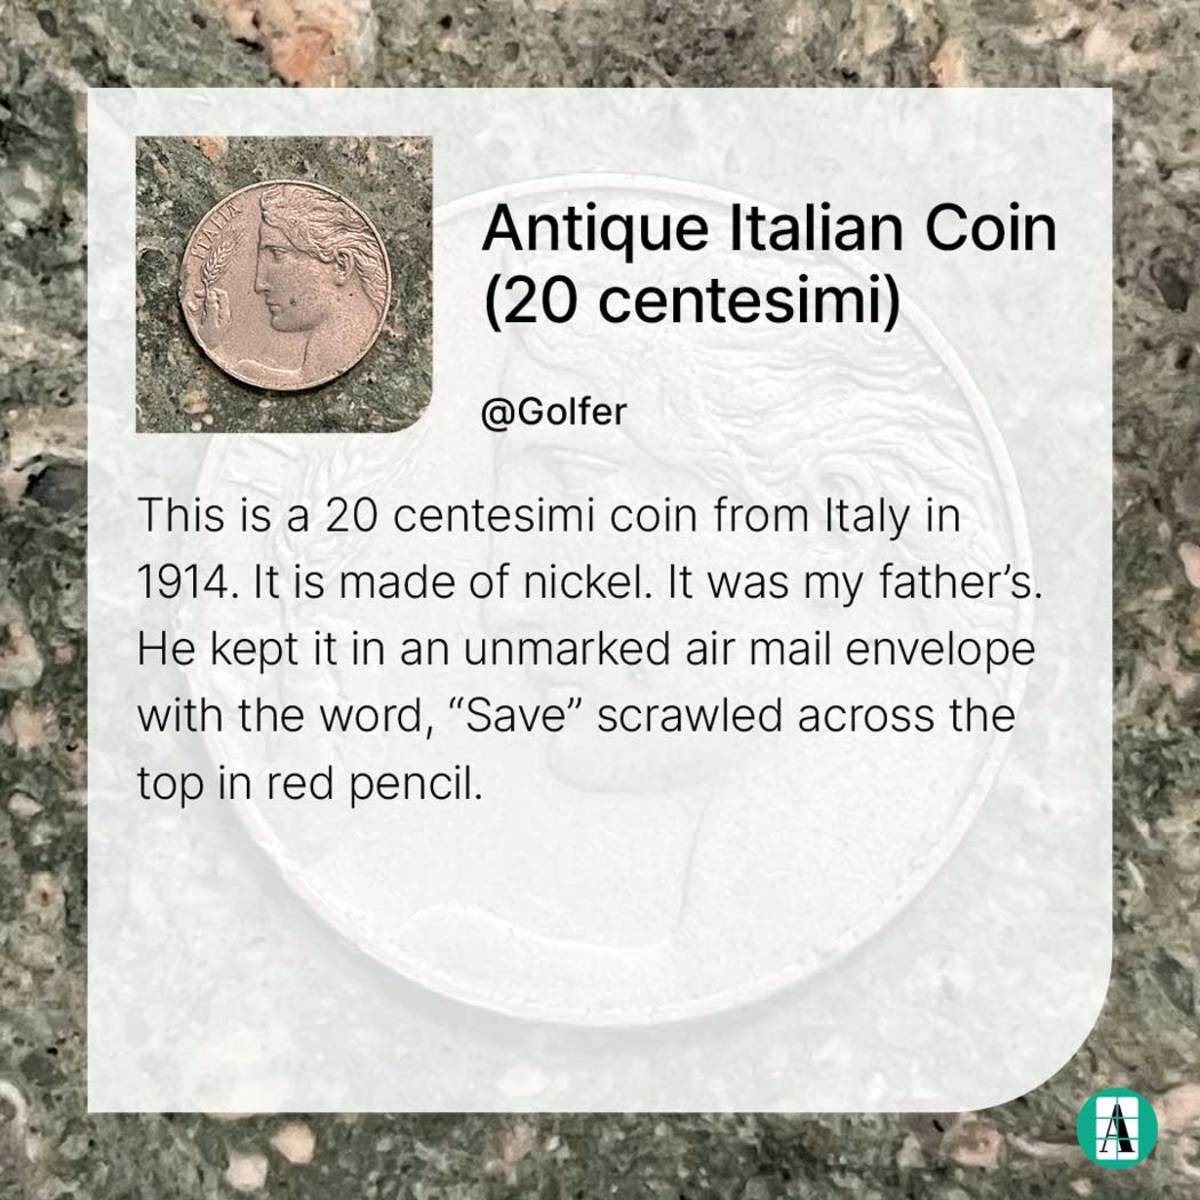 A costumer's picture and memory of an Italian coin cherished by his father now stored in Artifcts.